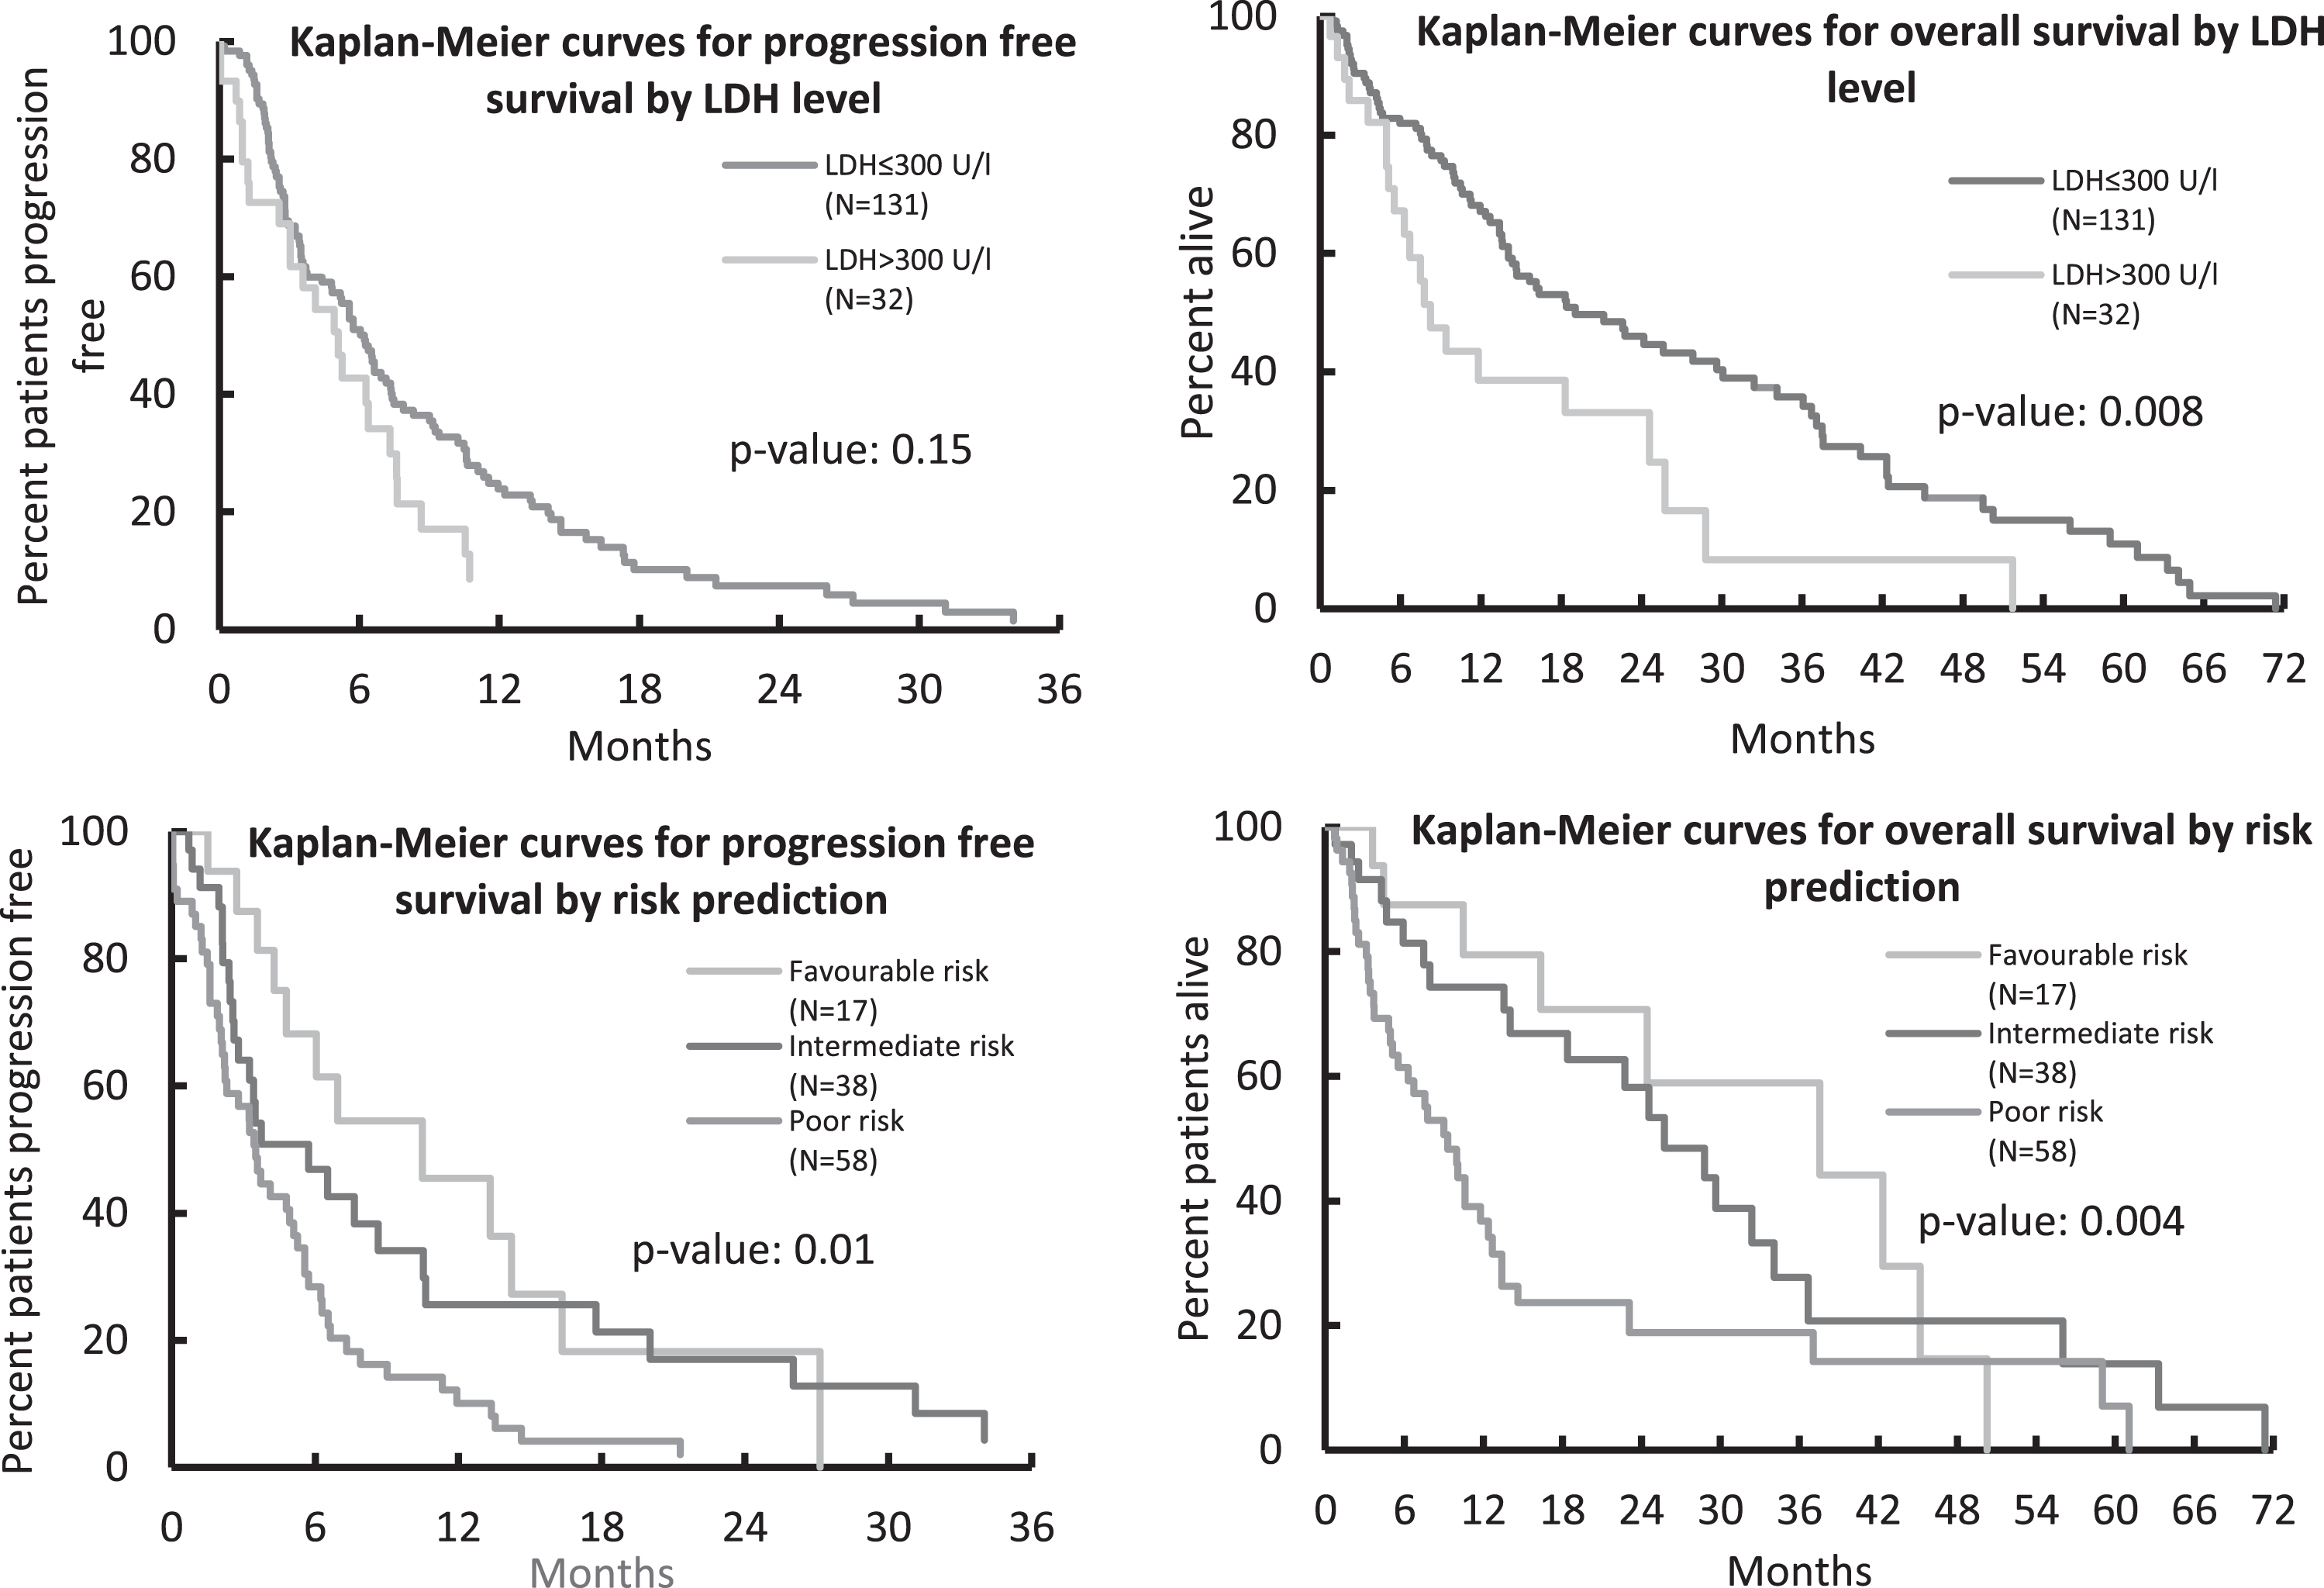 Progression-Free and Overall Survival according to LDH level and MSKCC risk score.